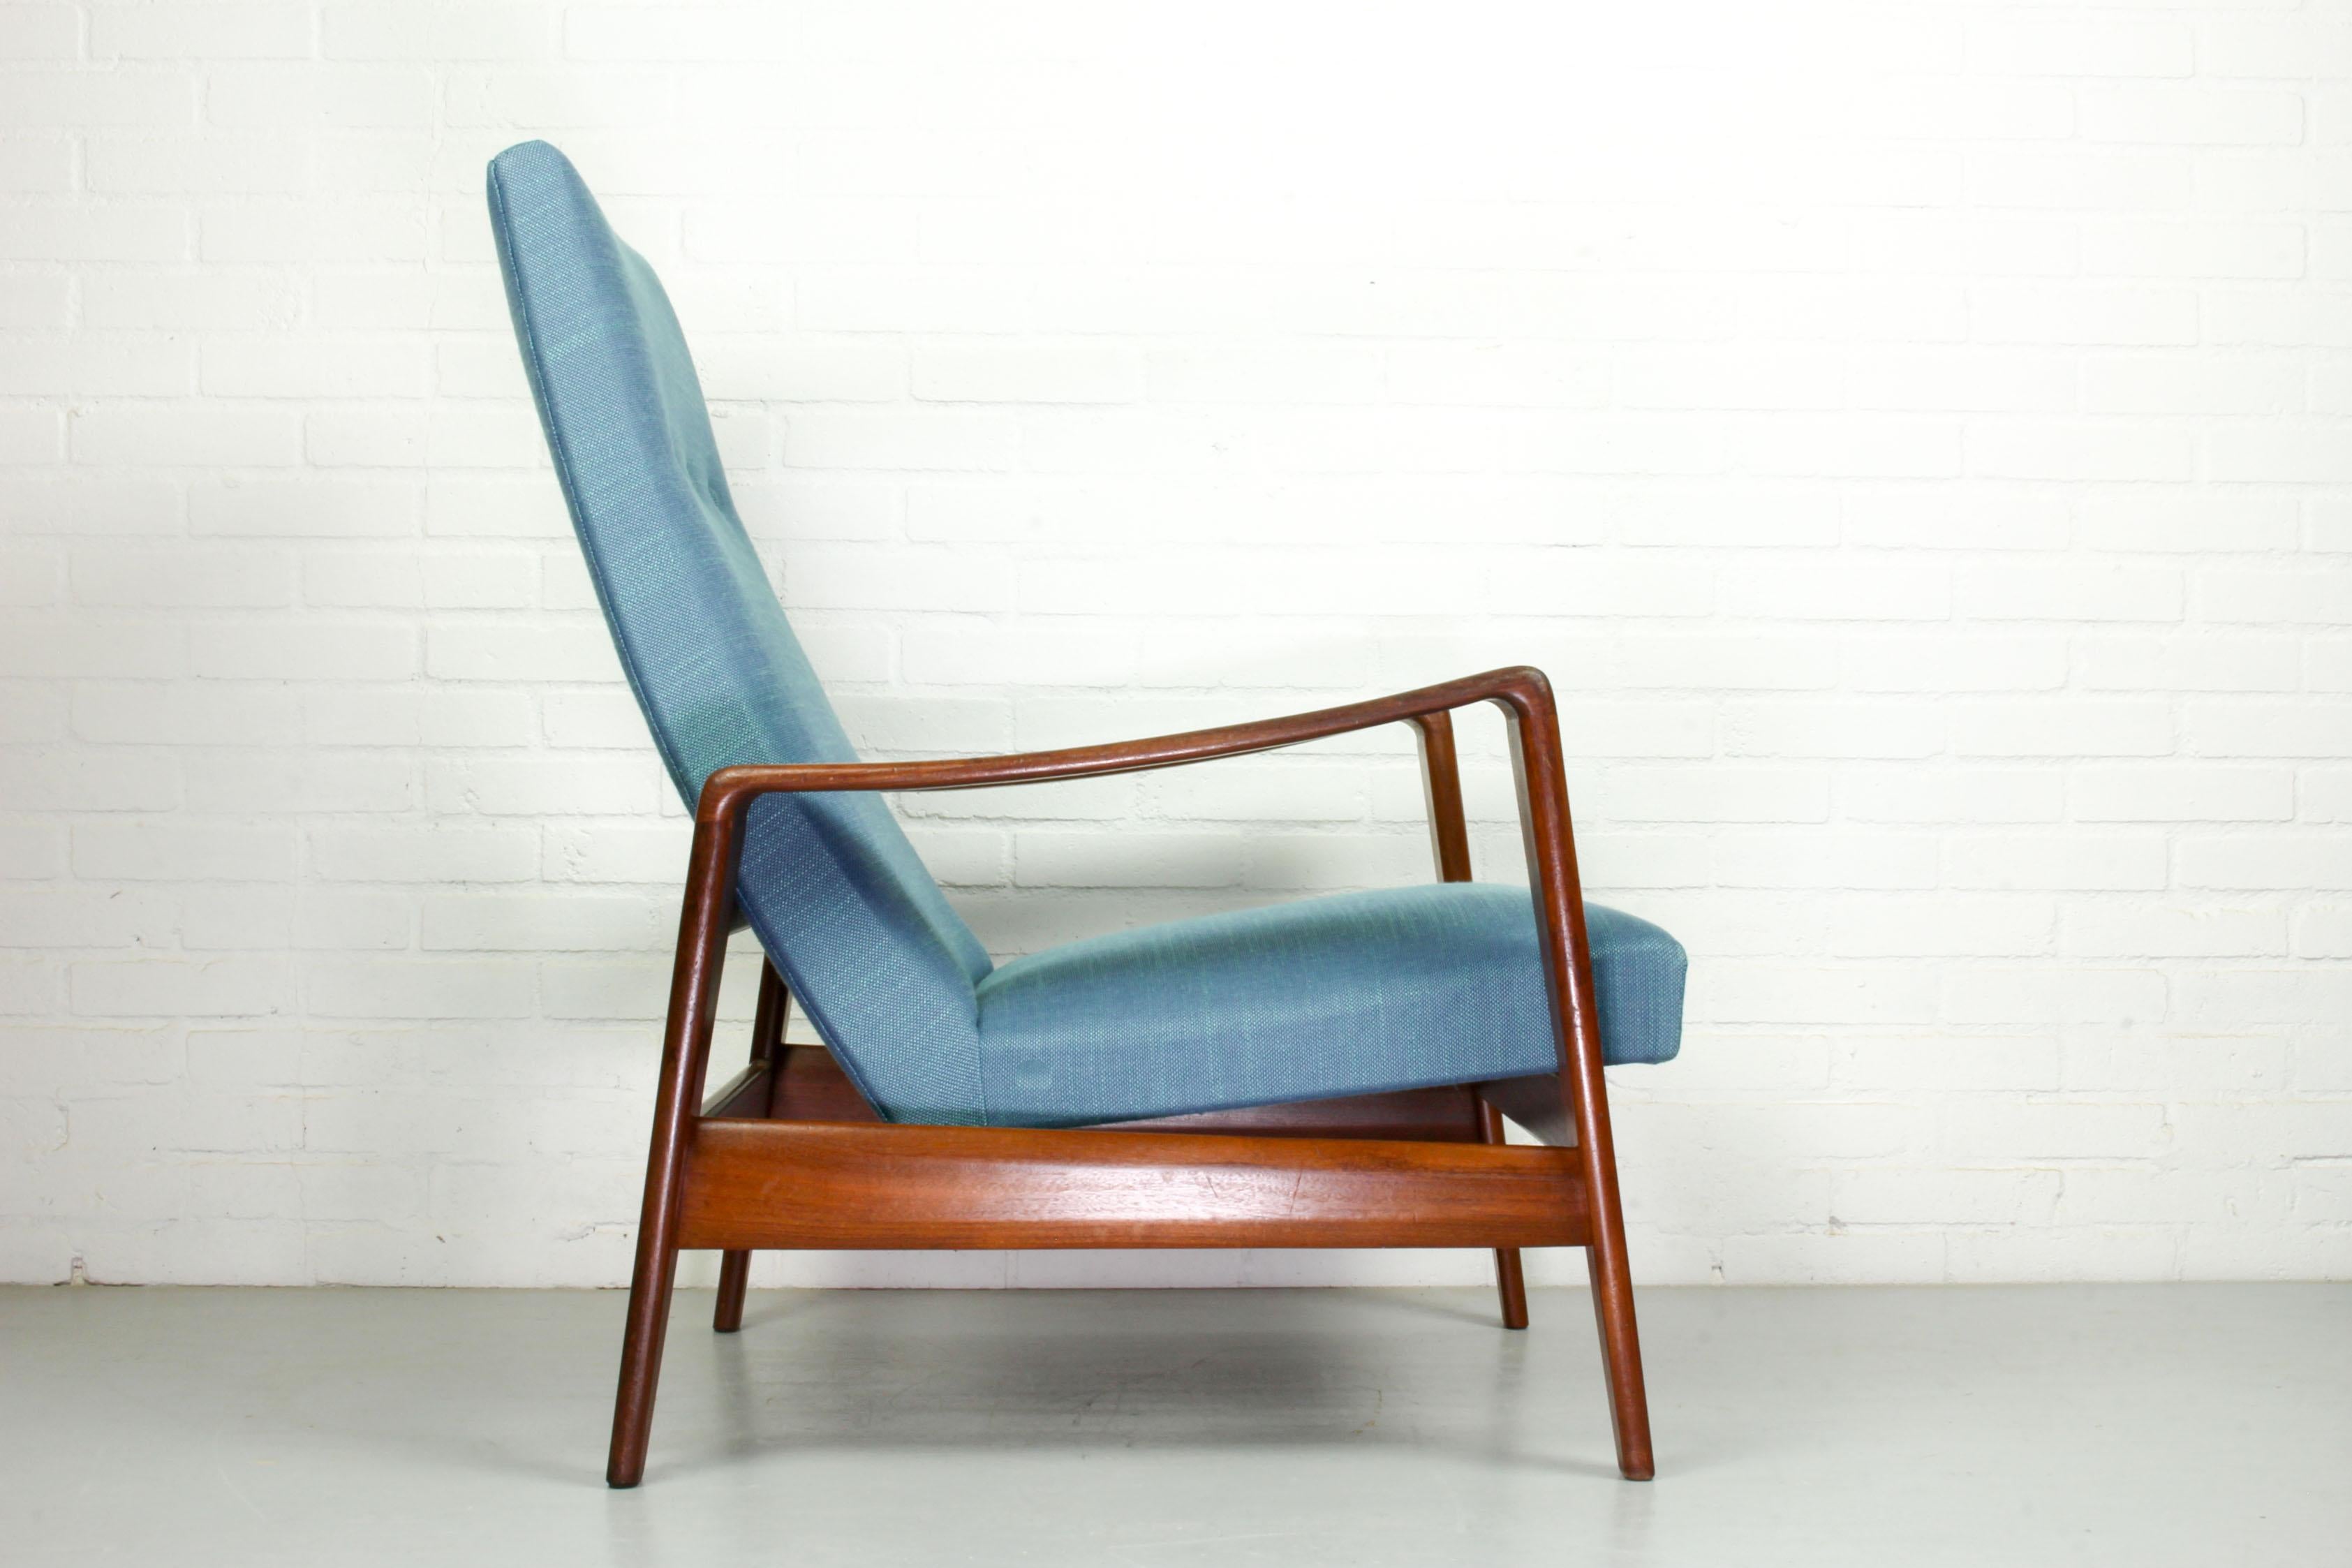 Dutch Lounge Chair by Arne Wahl Iversen for Komfort, 1960s